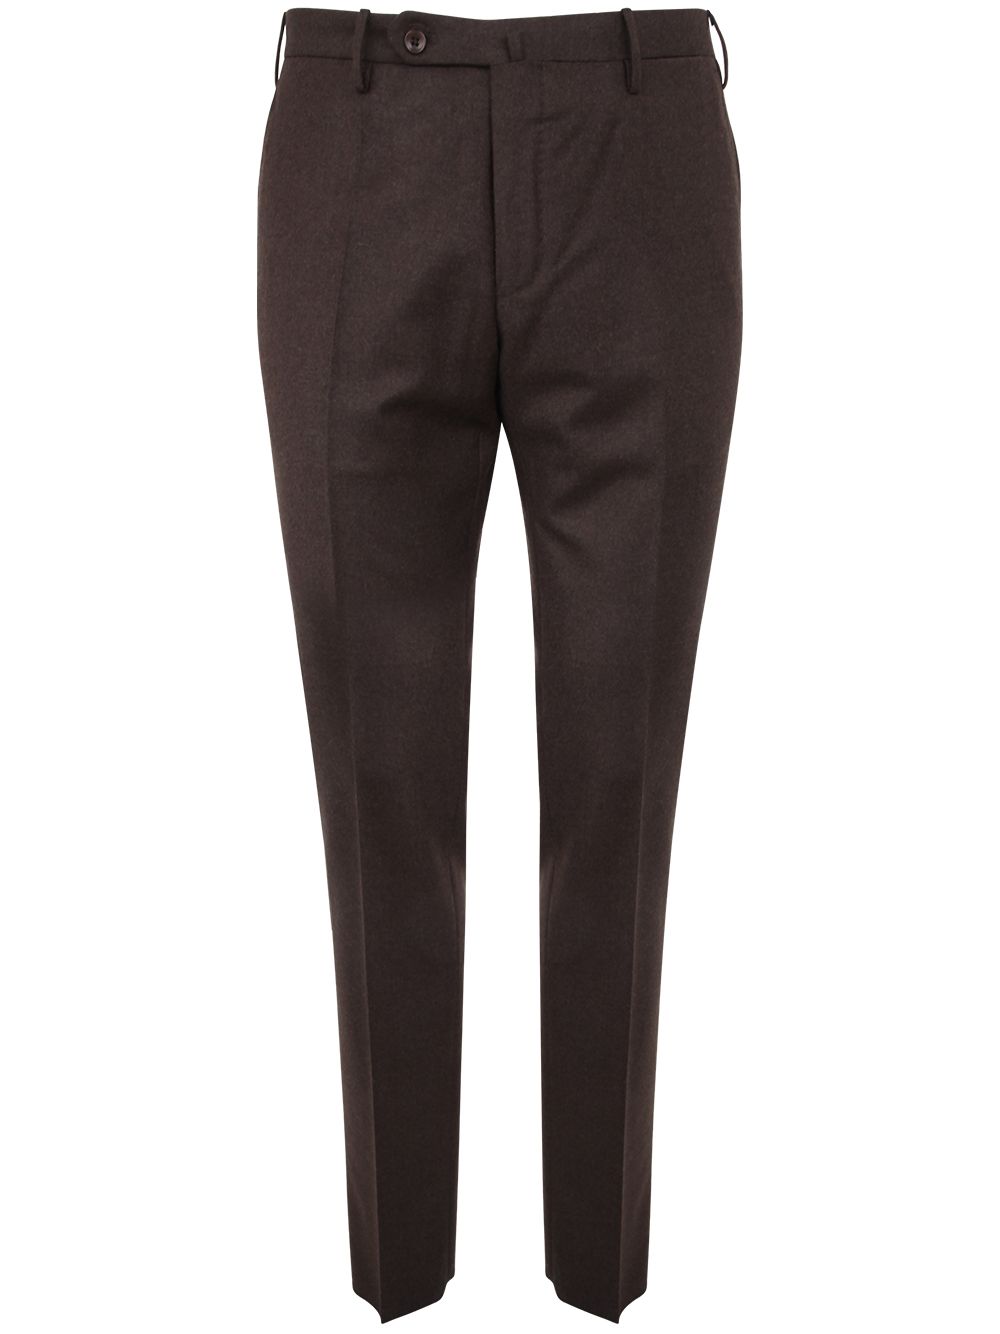 INCOTEX FLANNEL CLASSIC TROUSERS,1T0035.1645A